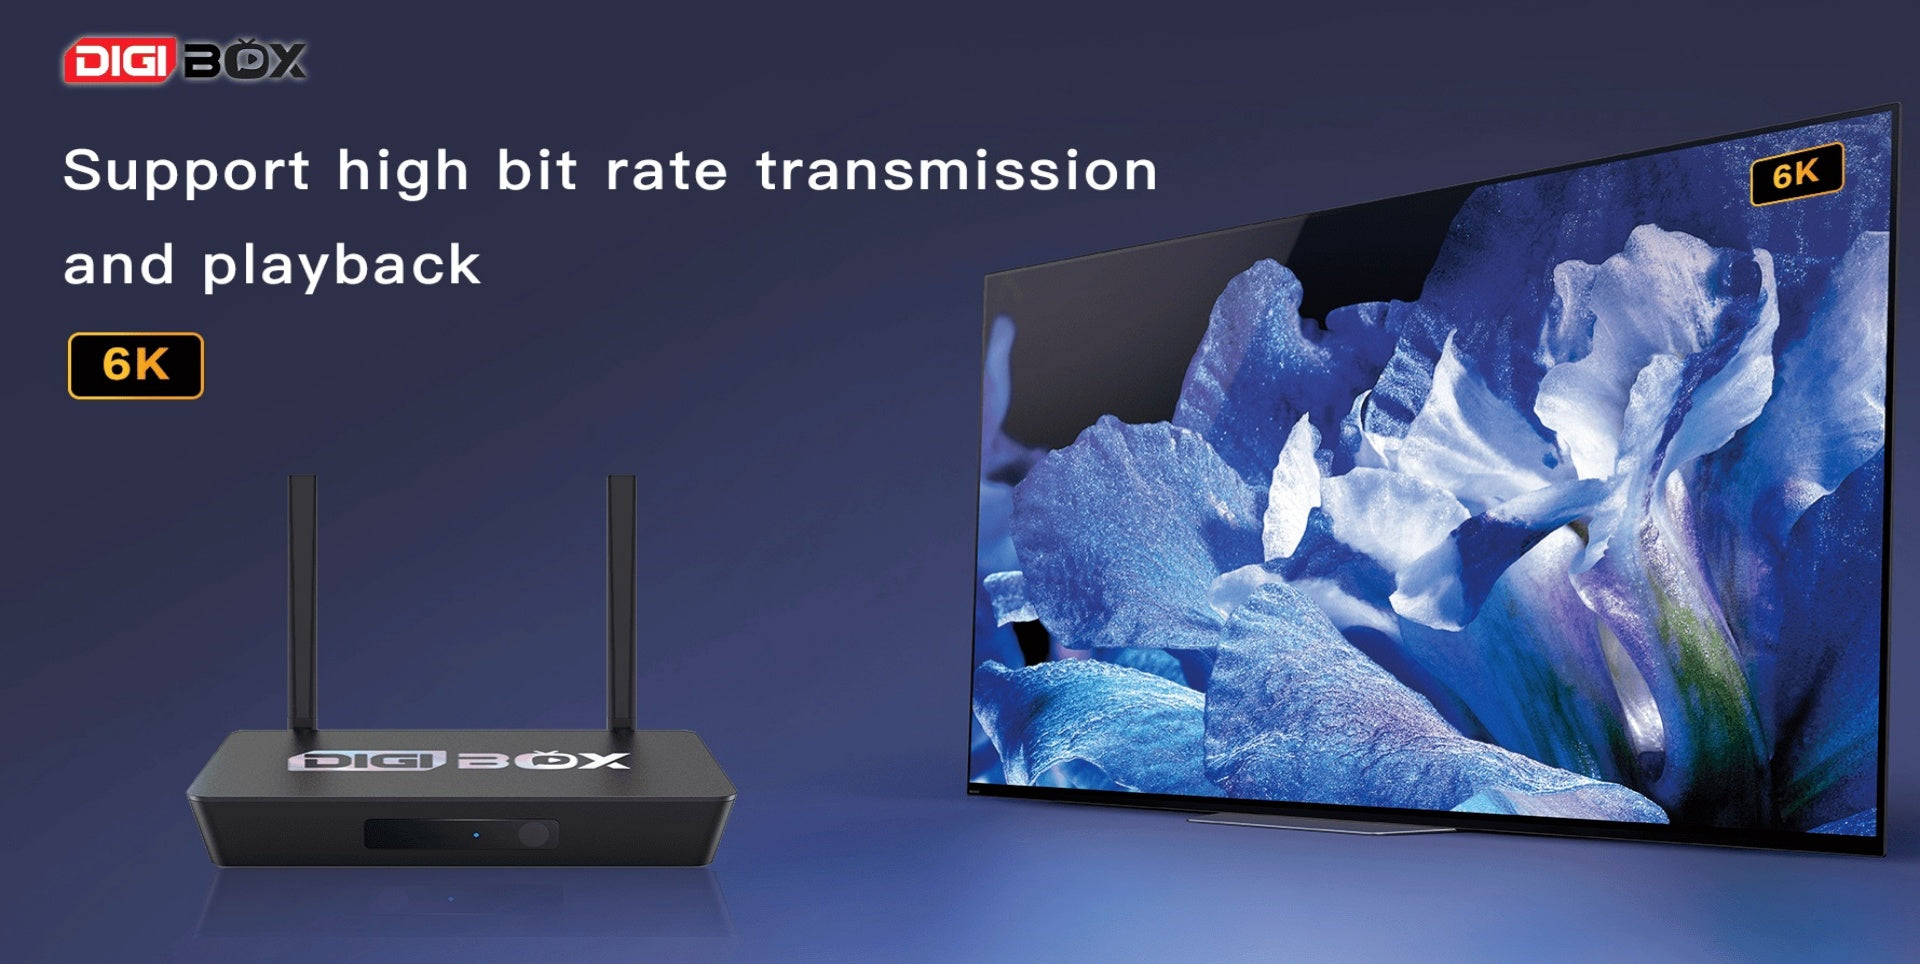 Experience superior 6K viewing with DIGIBOX, offering high bit rate transmission.